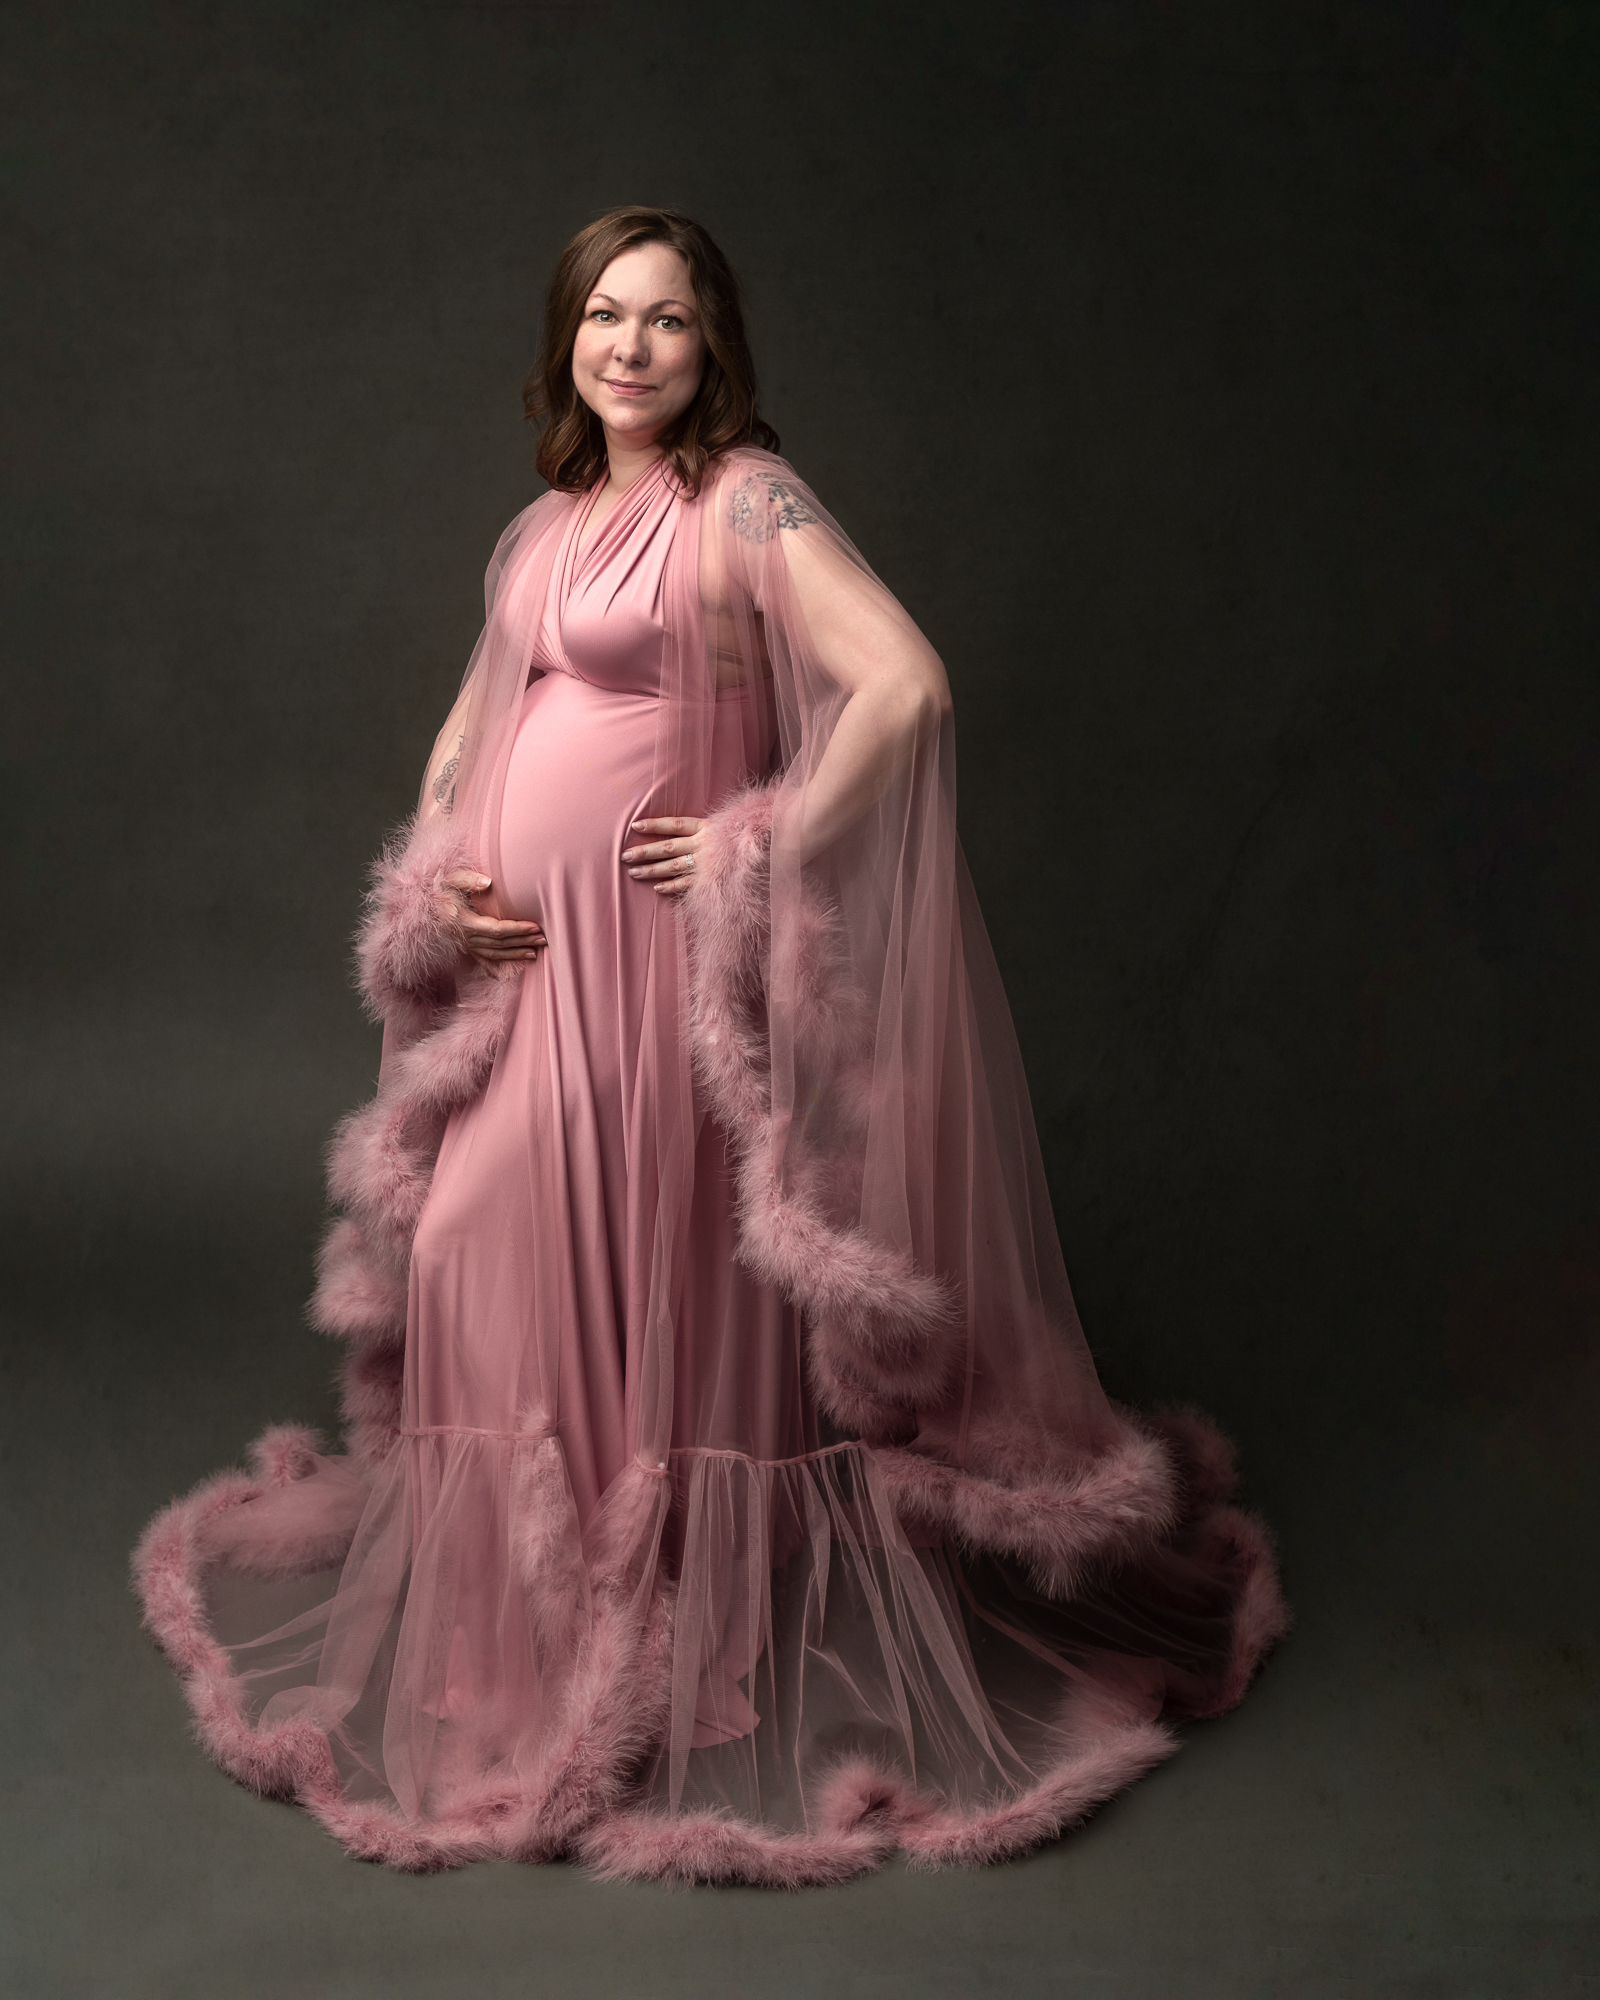 Pregnant woman in pink maternity gown with her hand on her bump Sky Lakes Women's Health Clinic